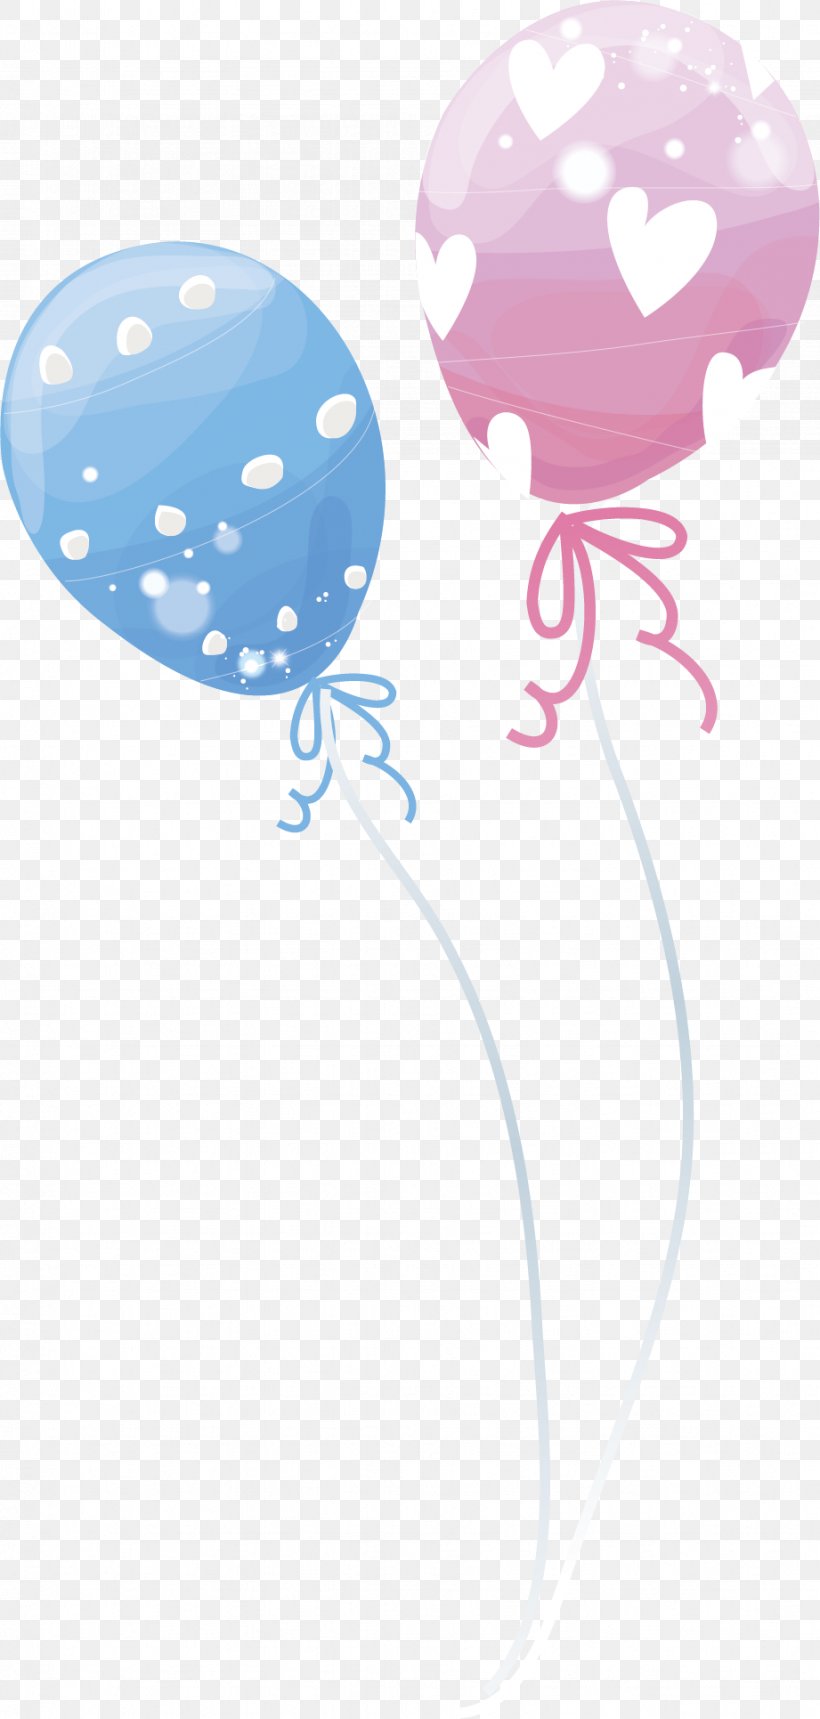 Balloon Illustration, PNG, 921x1931px, Balloon, Ballonnet, Drawing, Heart, Party Supply Download Free